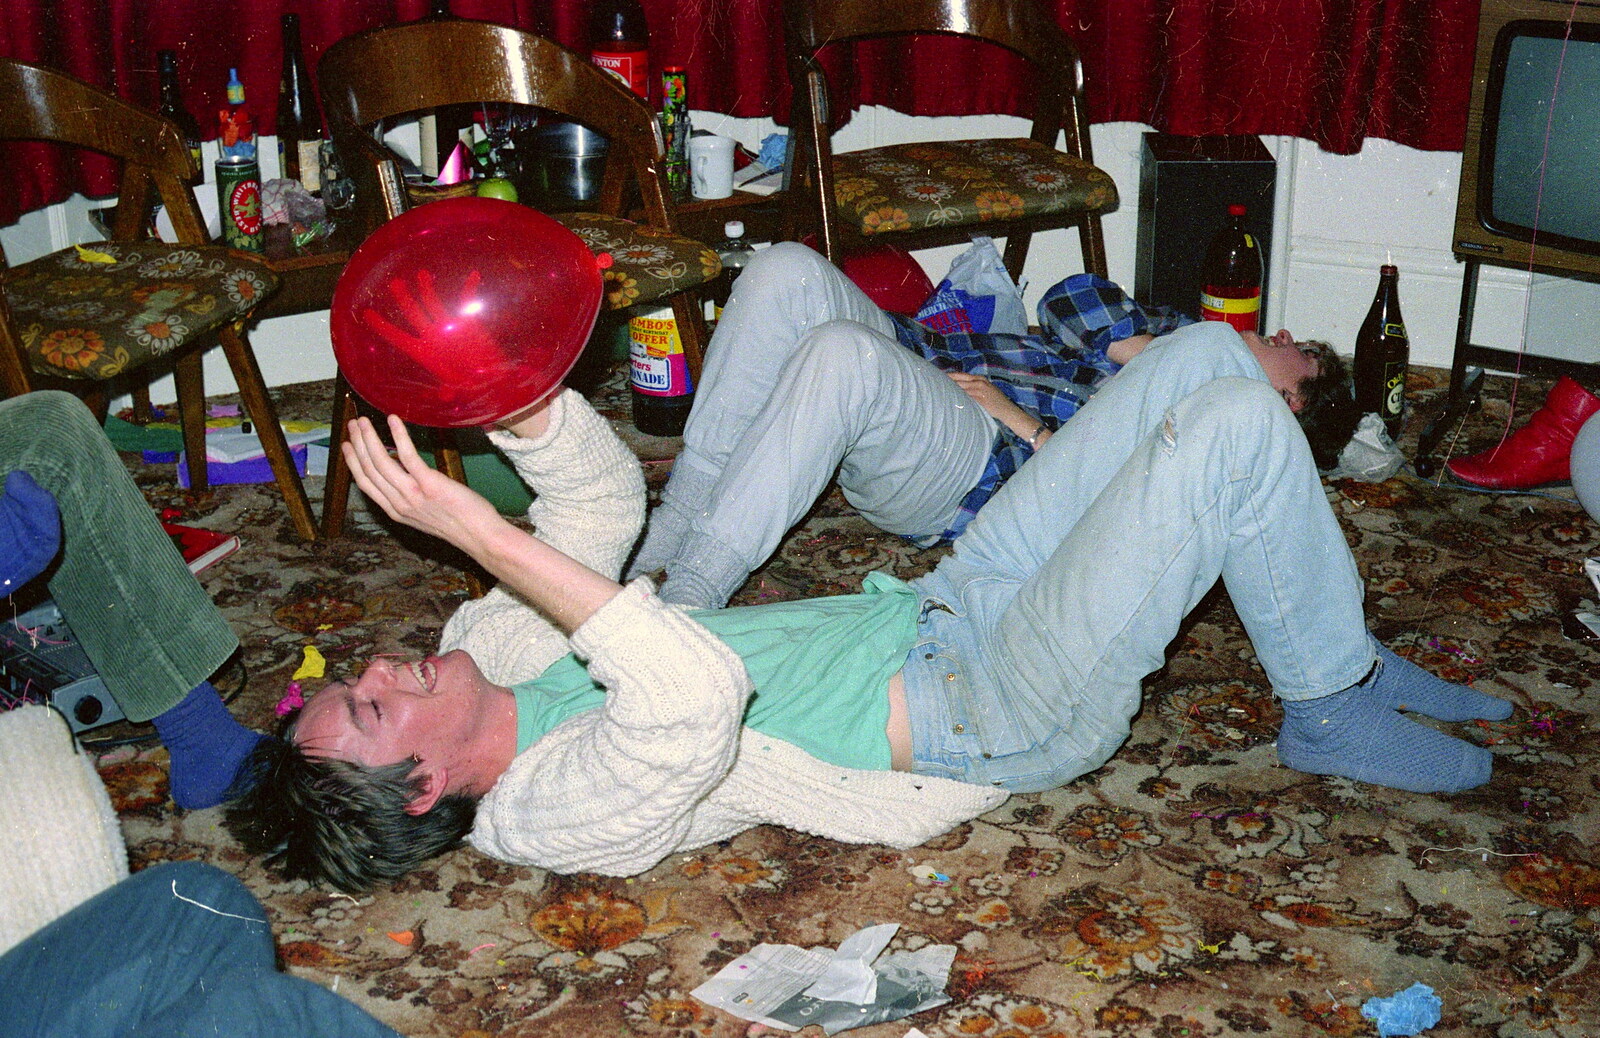 Malcolm's on the floor with balloons from Uni: BABS Christmas Ball and a Beaumont Street Party, Plymouth - 16th December 1985